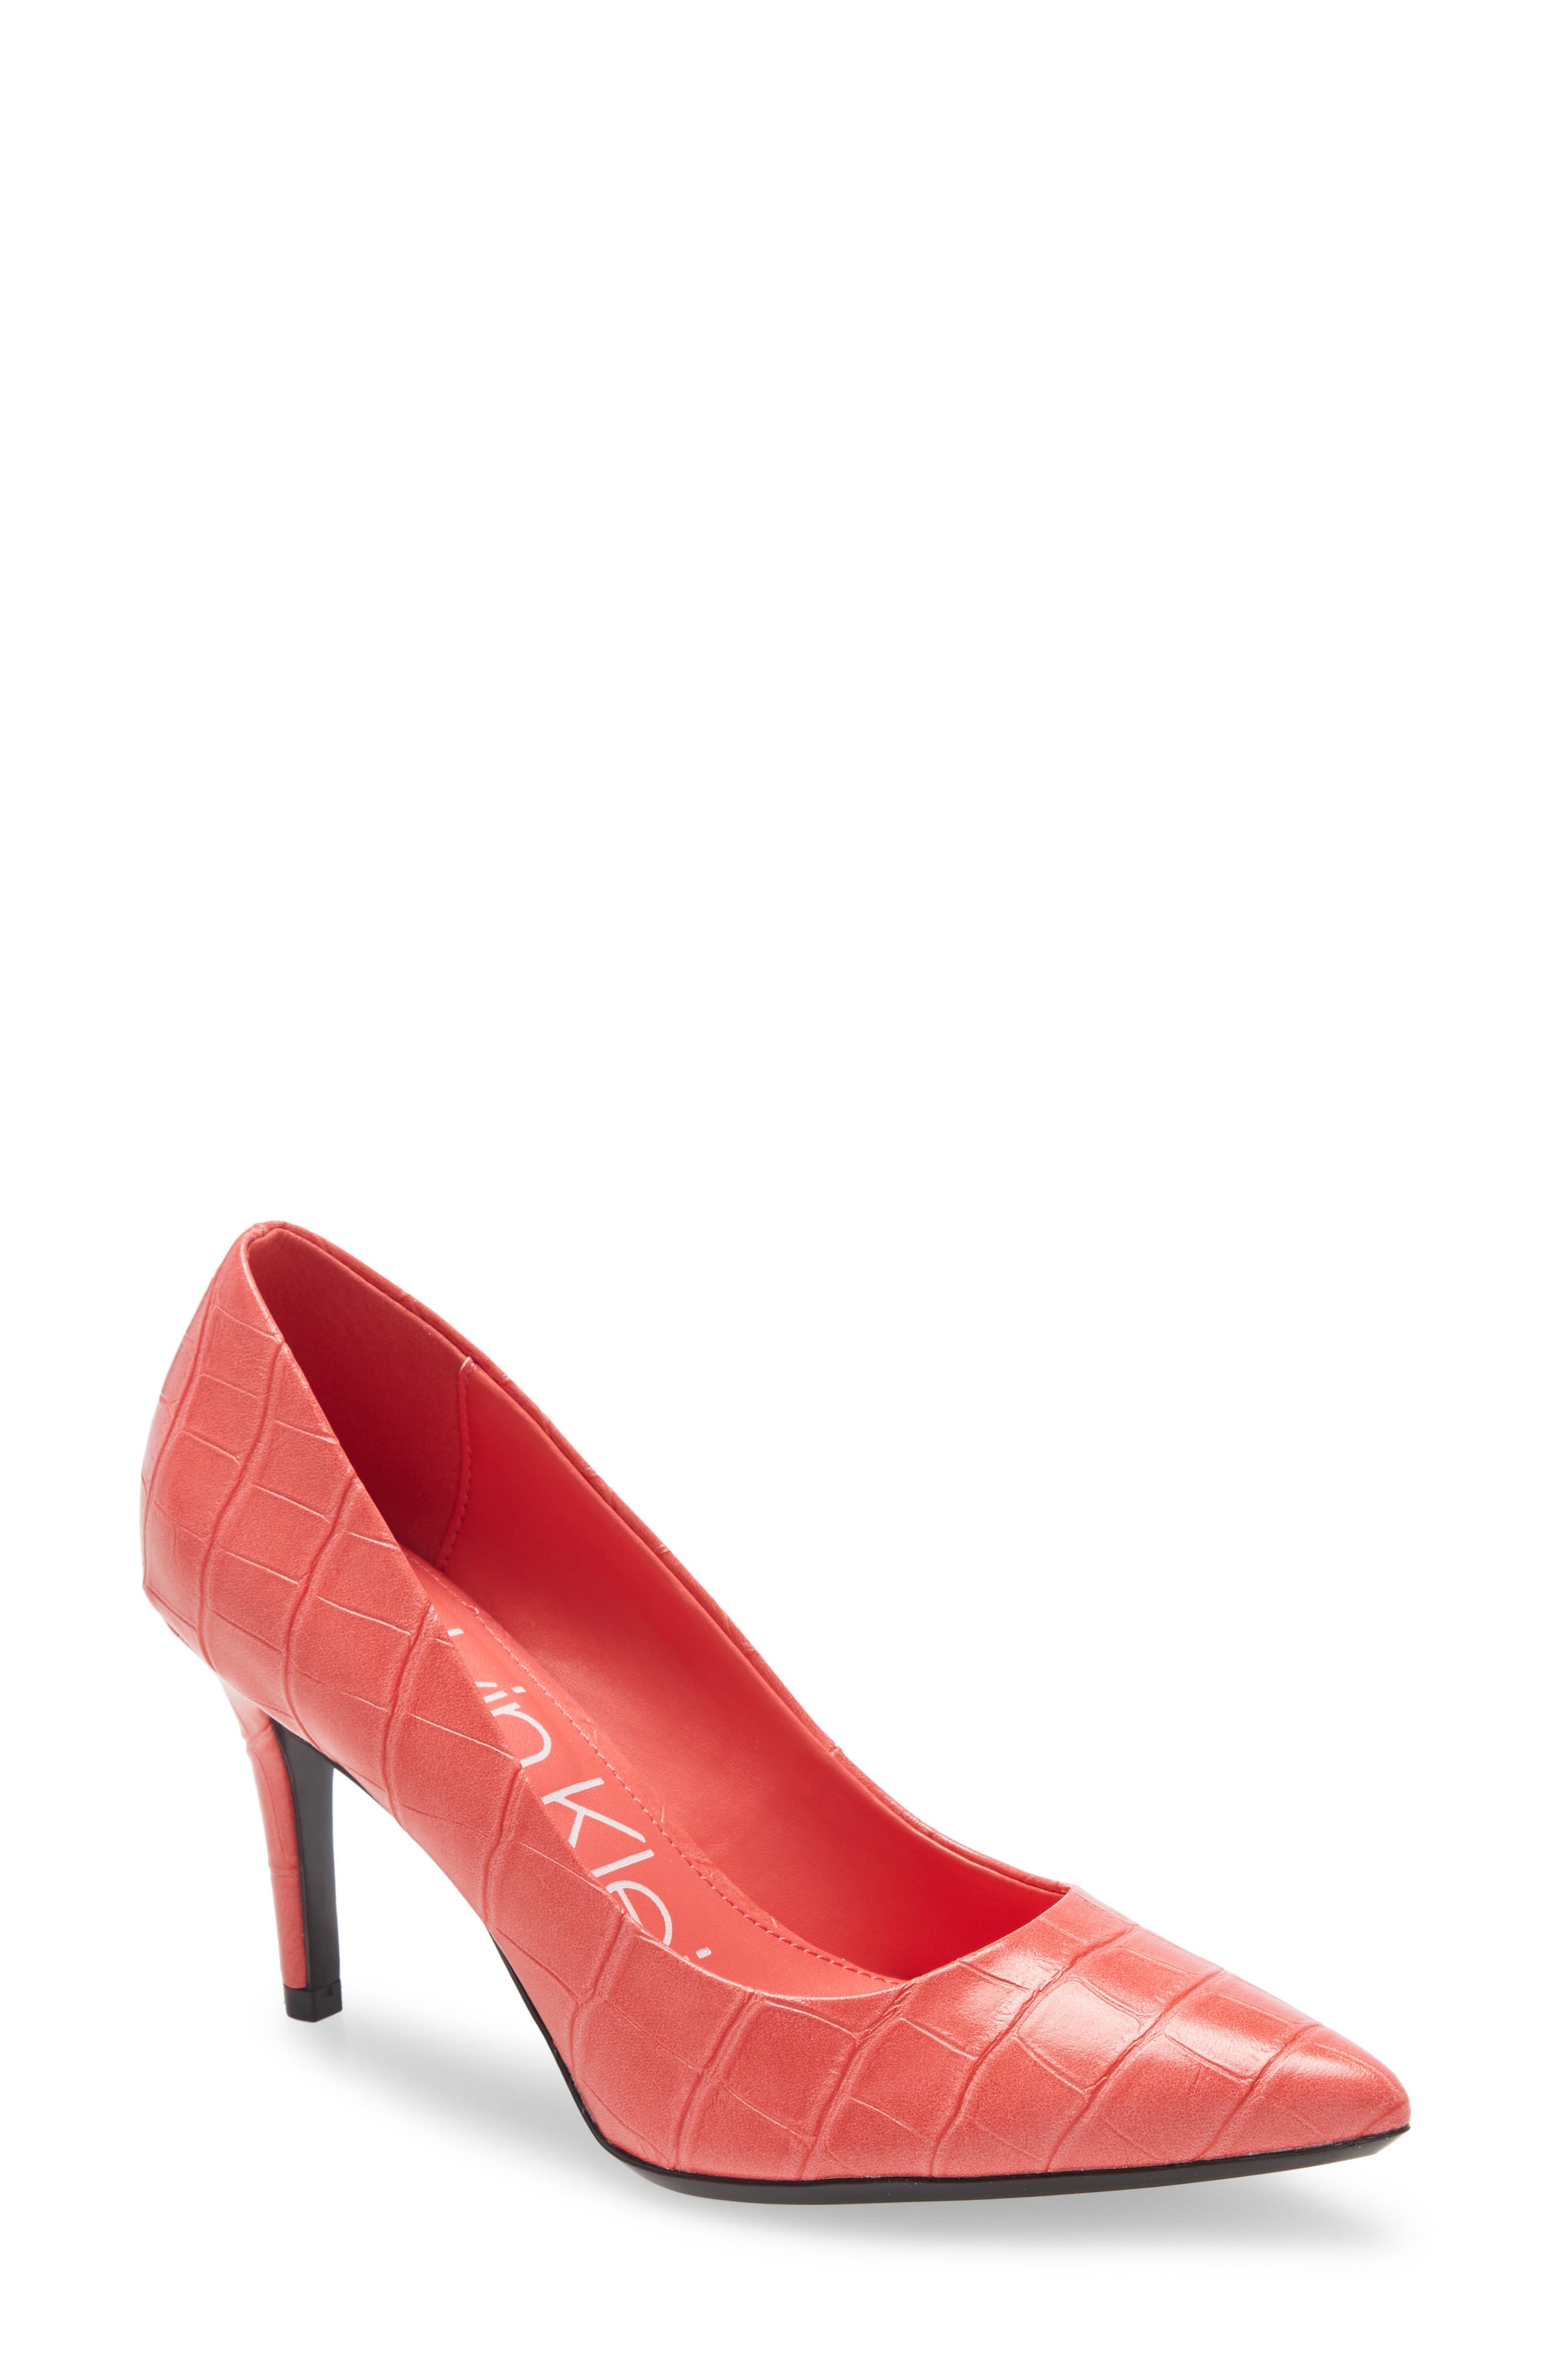 UPC 194060359502 product image for Women's Calvin Klein 'Gayle' Pointy Toe Pump, Size 7.5 M - Coral | upcitemdb.com